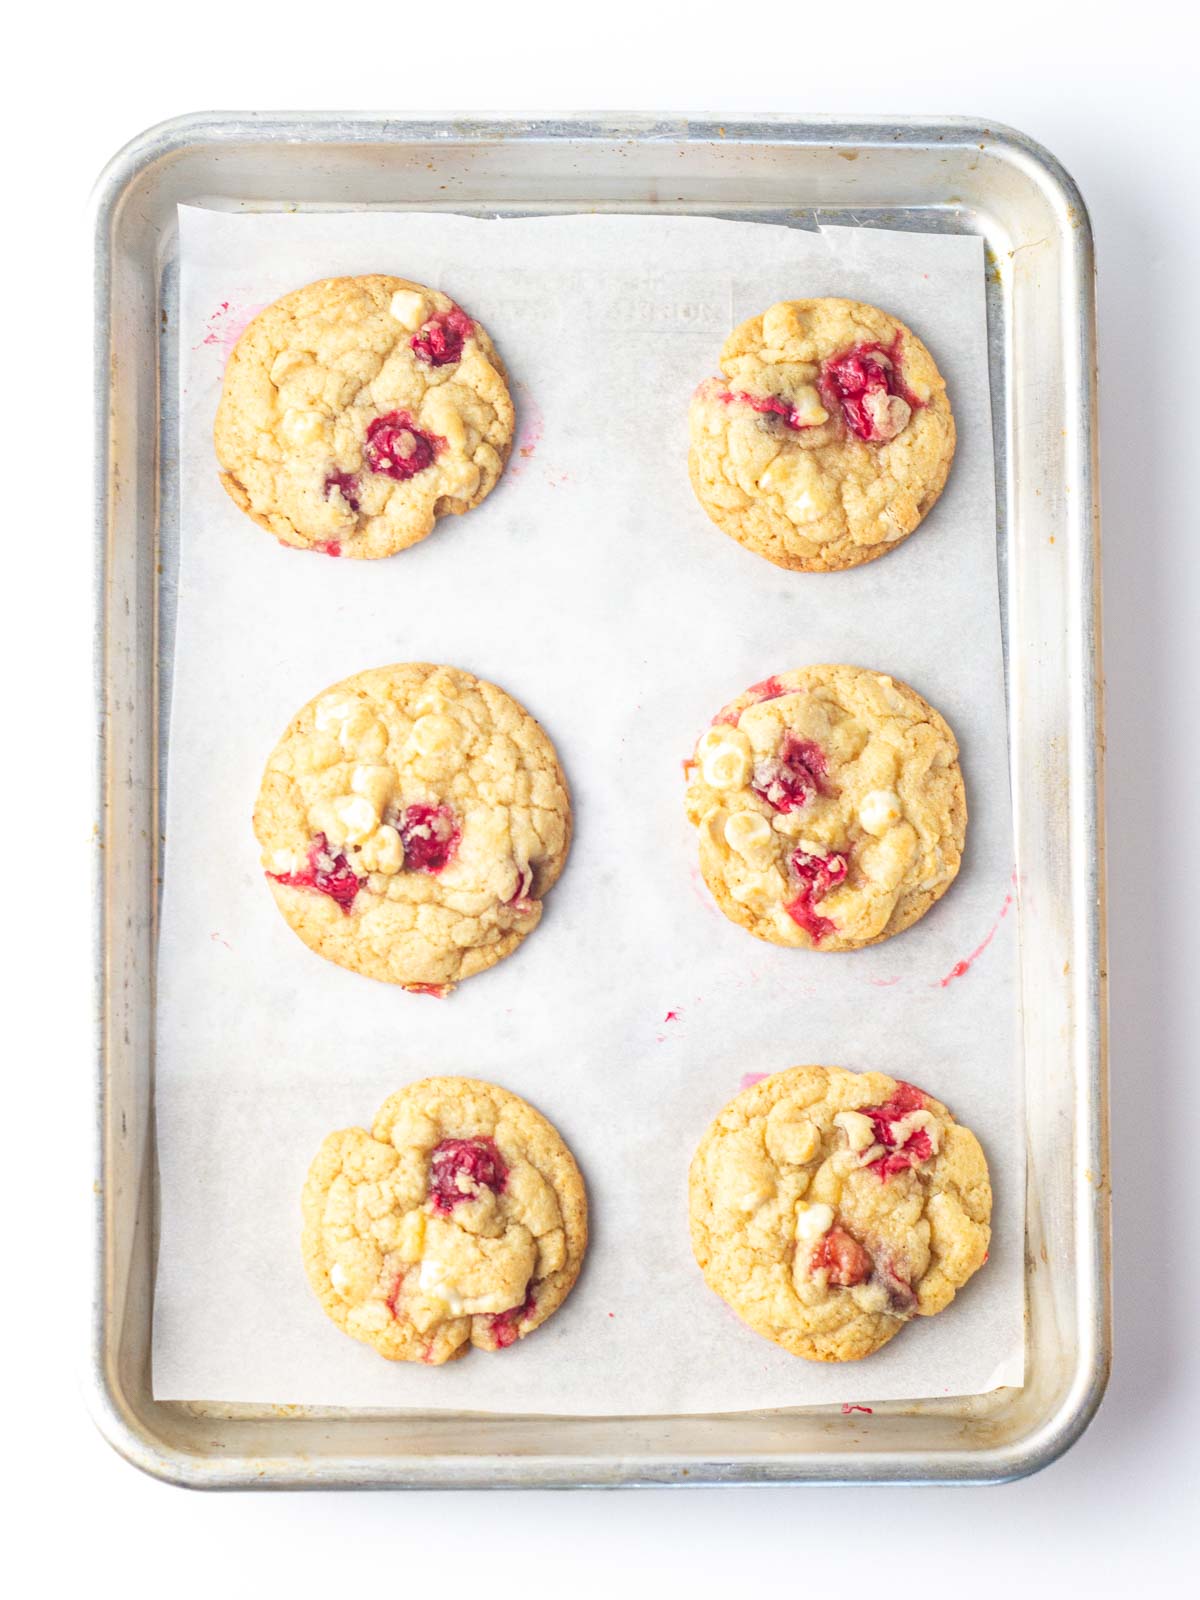 Top down view of baked cranberry white chocolate cookies on a parchment lined baking sheet.